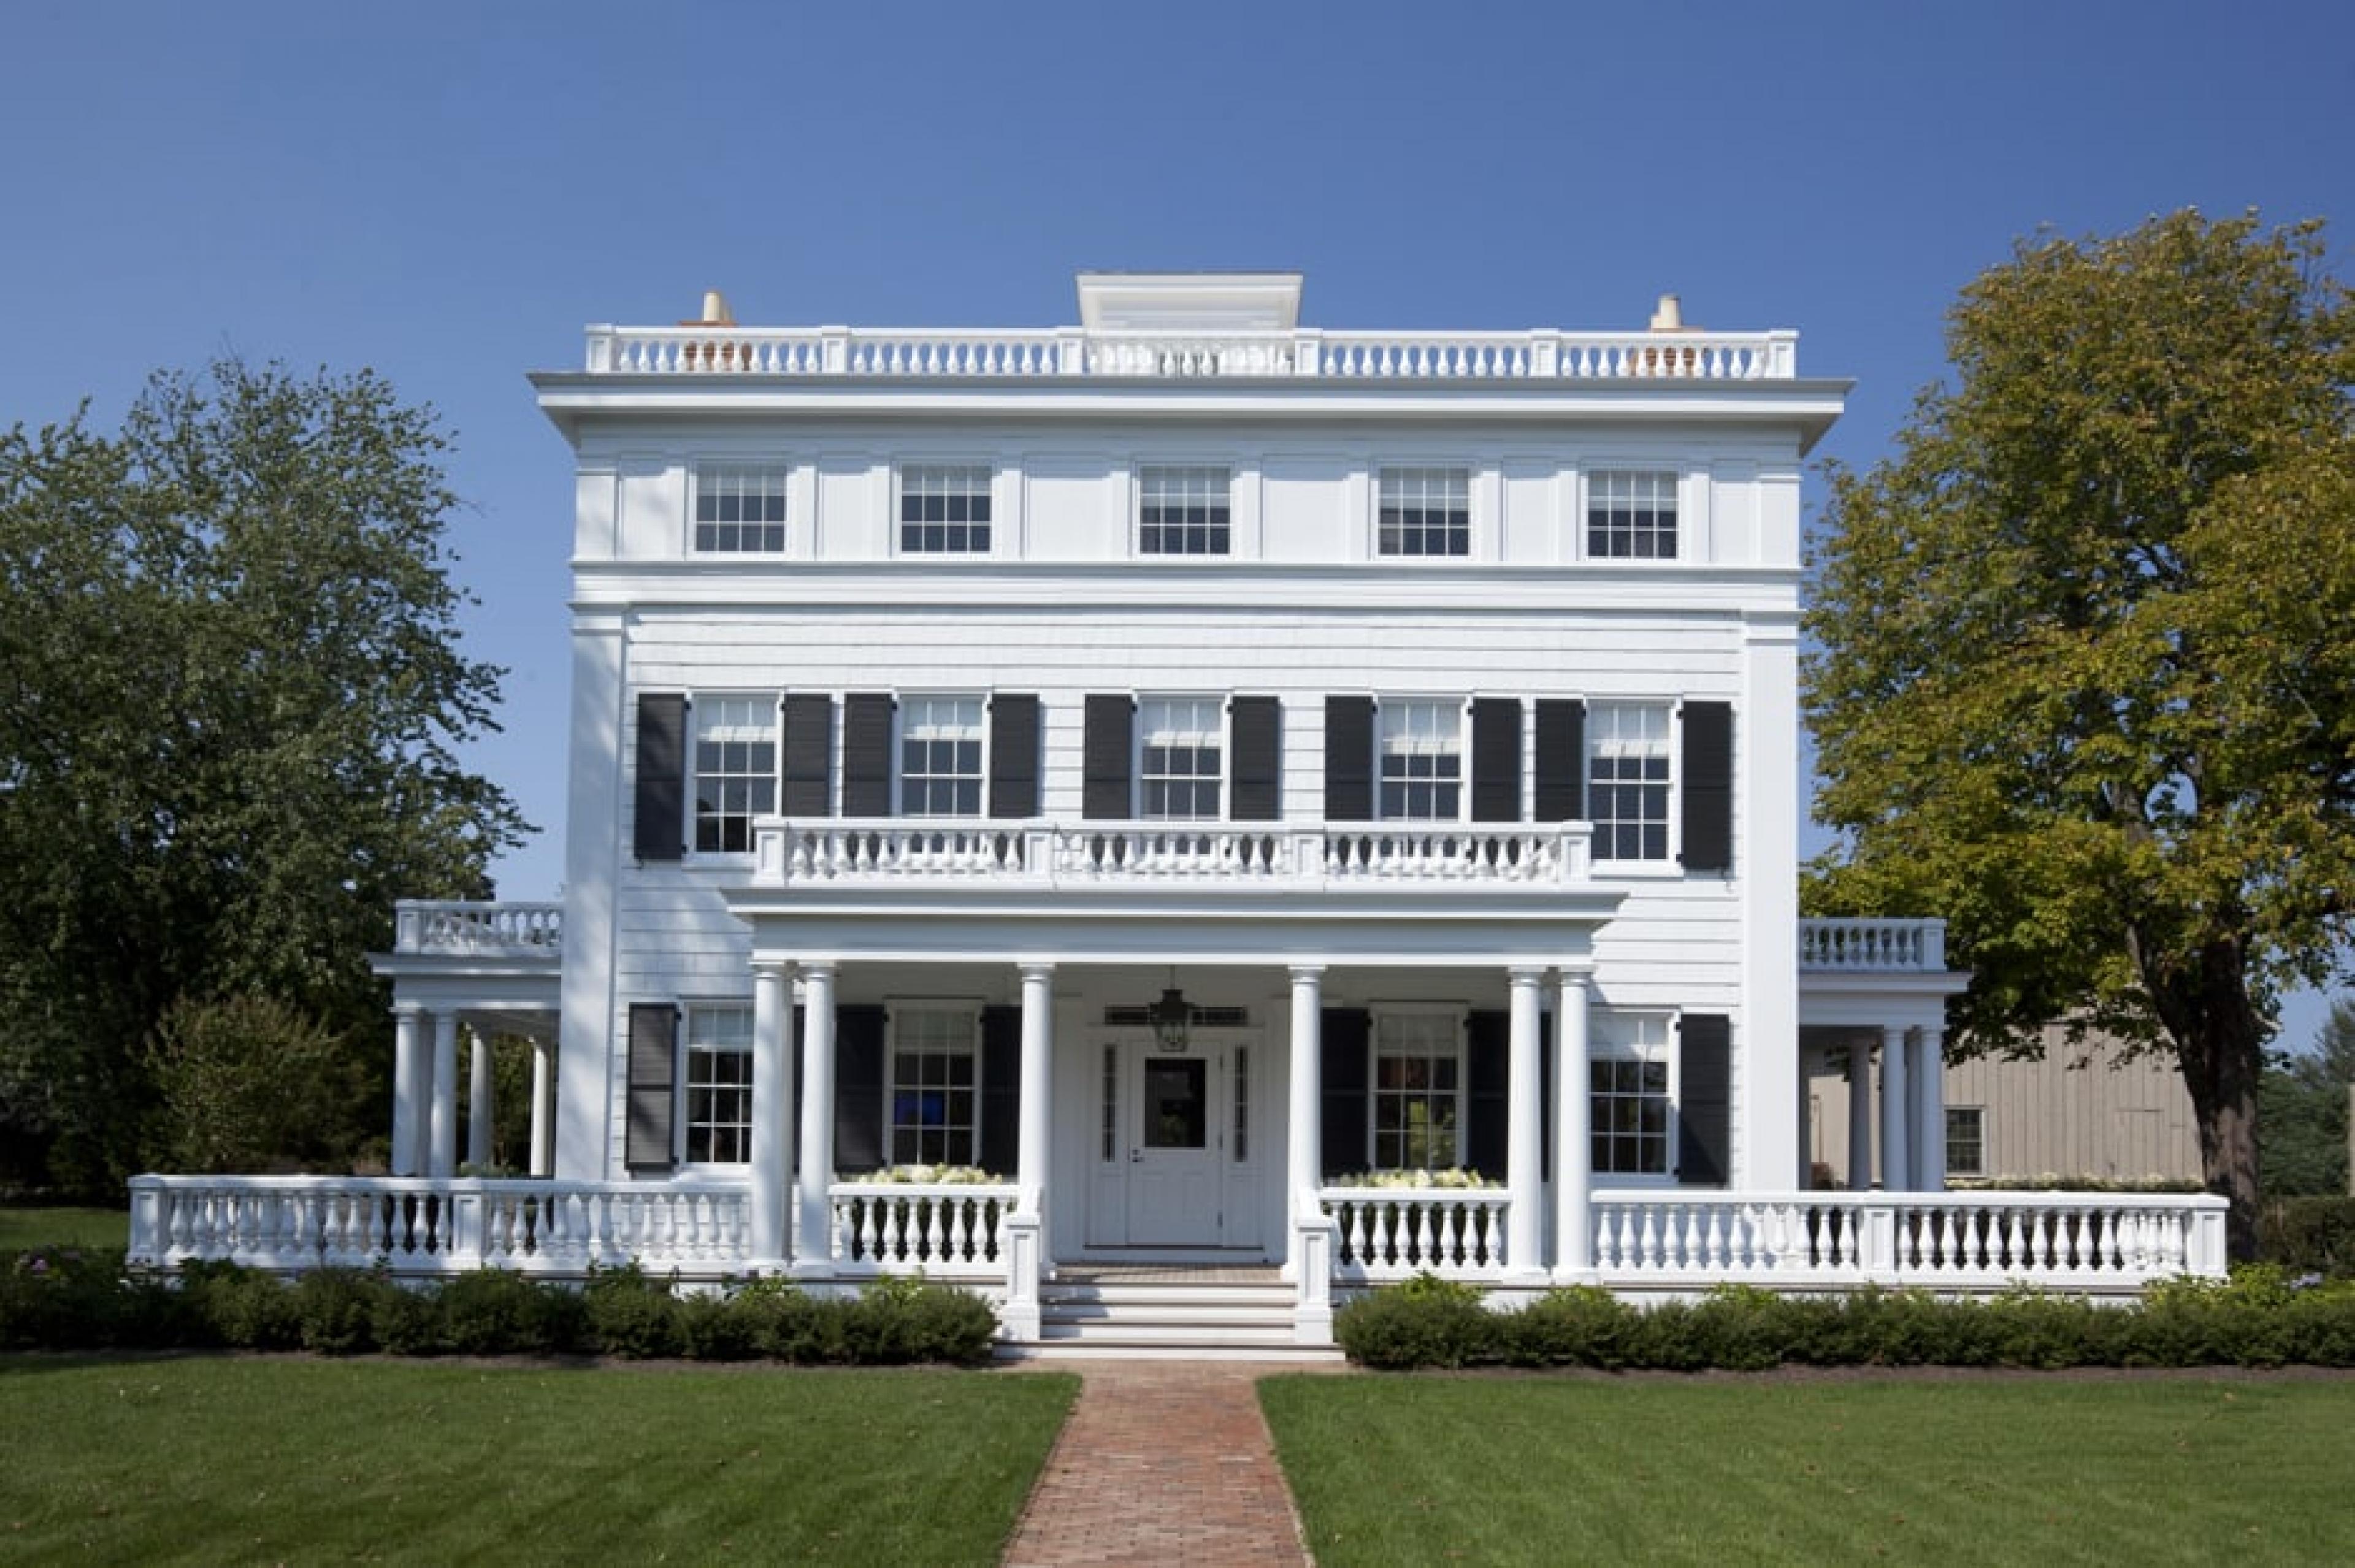 Exterior view - Topping Rose House, Hamptons, New York - Courtesy of Tim Street-Porter